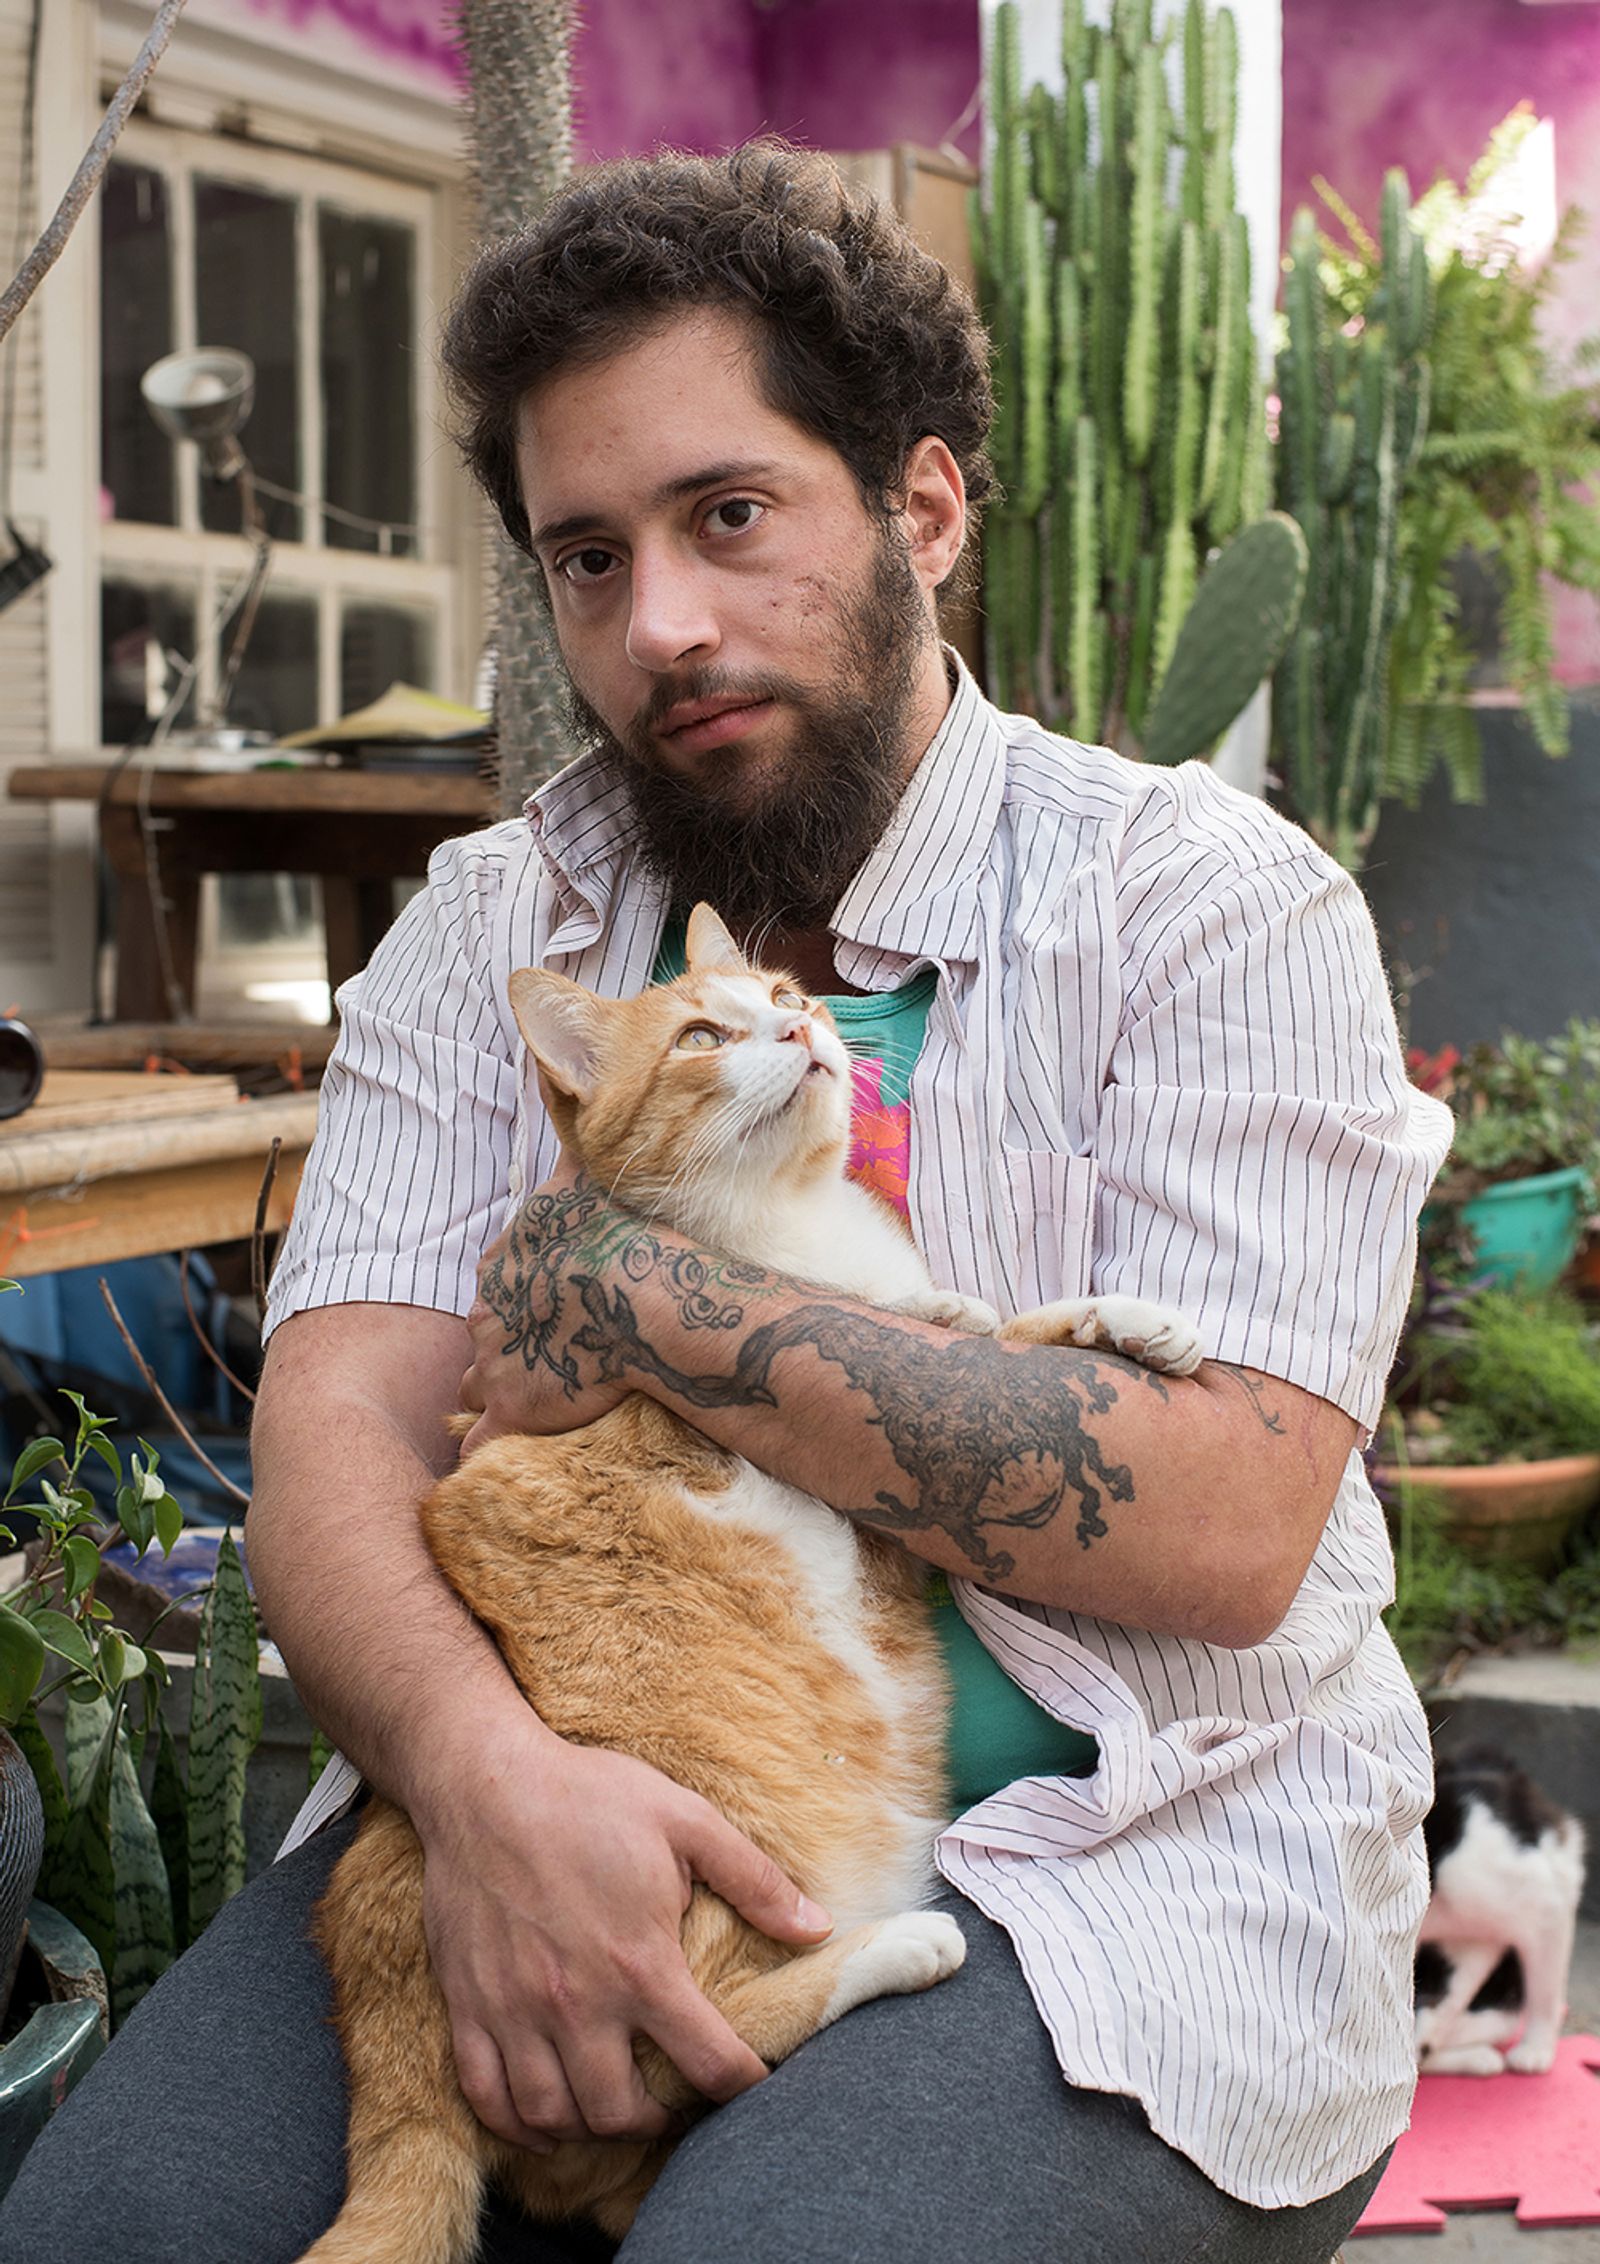 © Camila Falcão - Juno, writer and animal lover, sits at his yard with Deleuze, one of his cats, on his lap